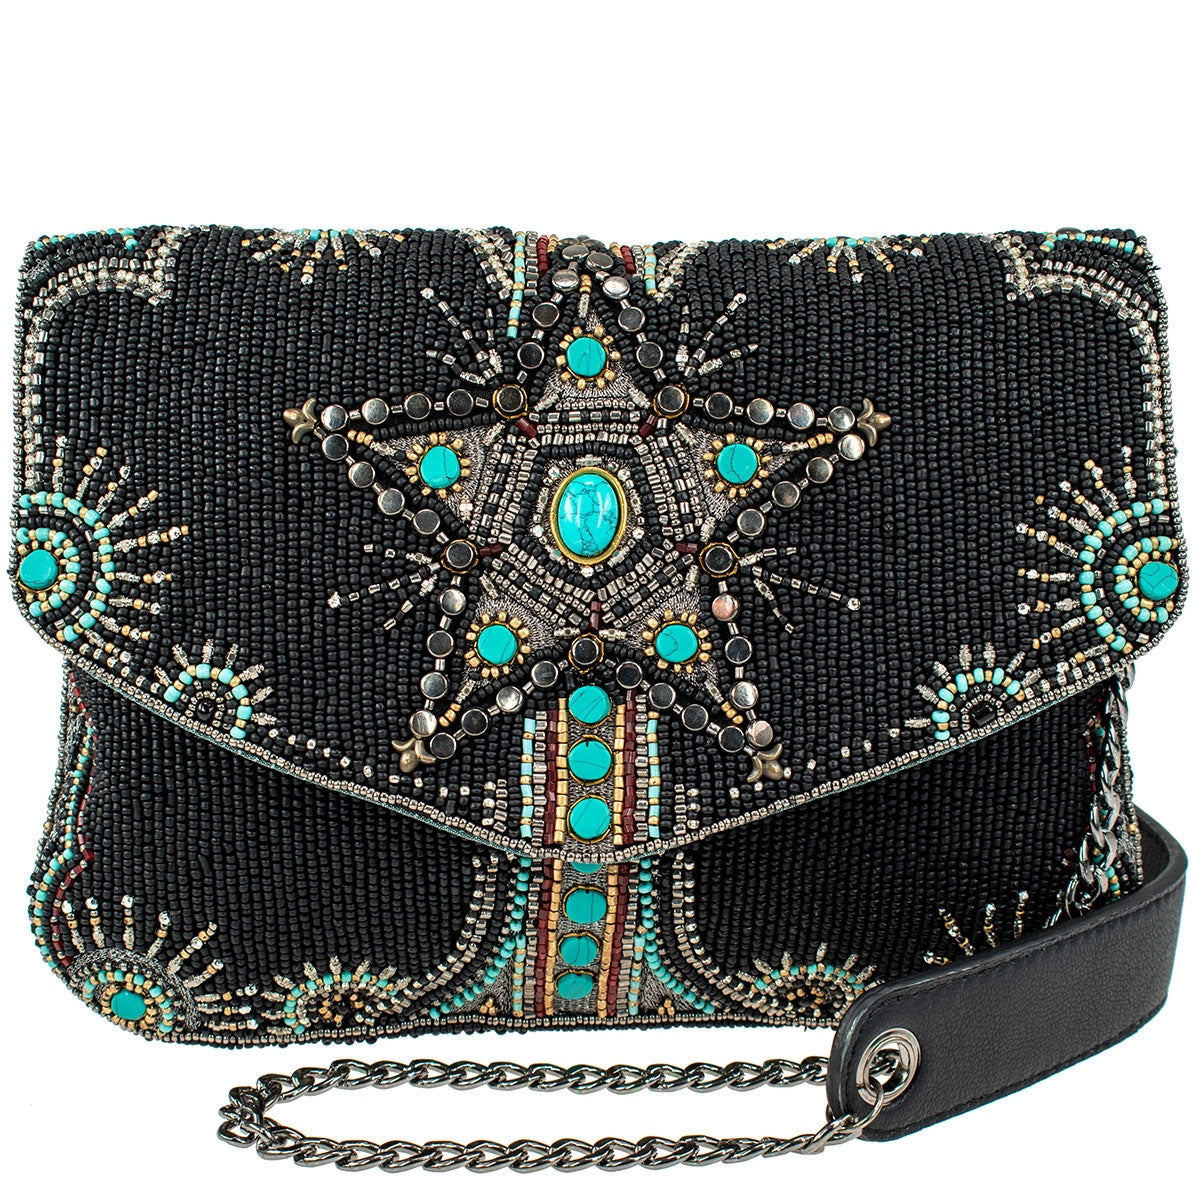 Western Beaded Bags & Accessories - Mary Frances – Mary Frances Accessories